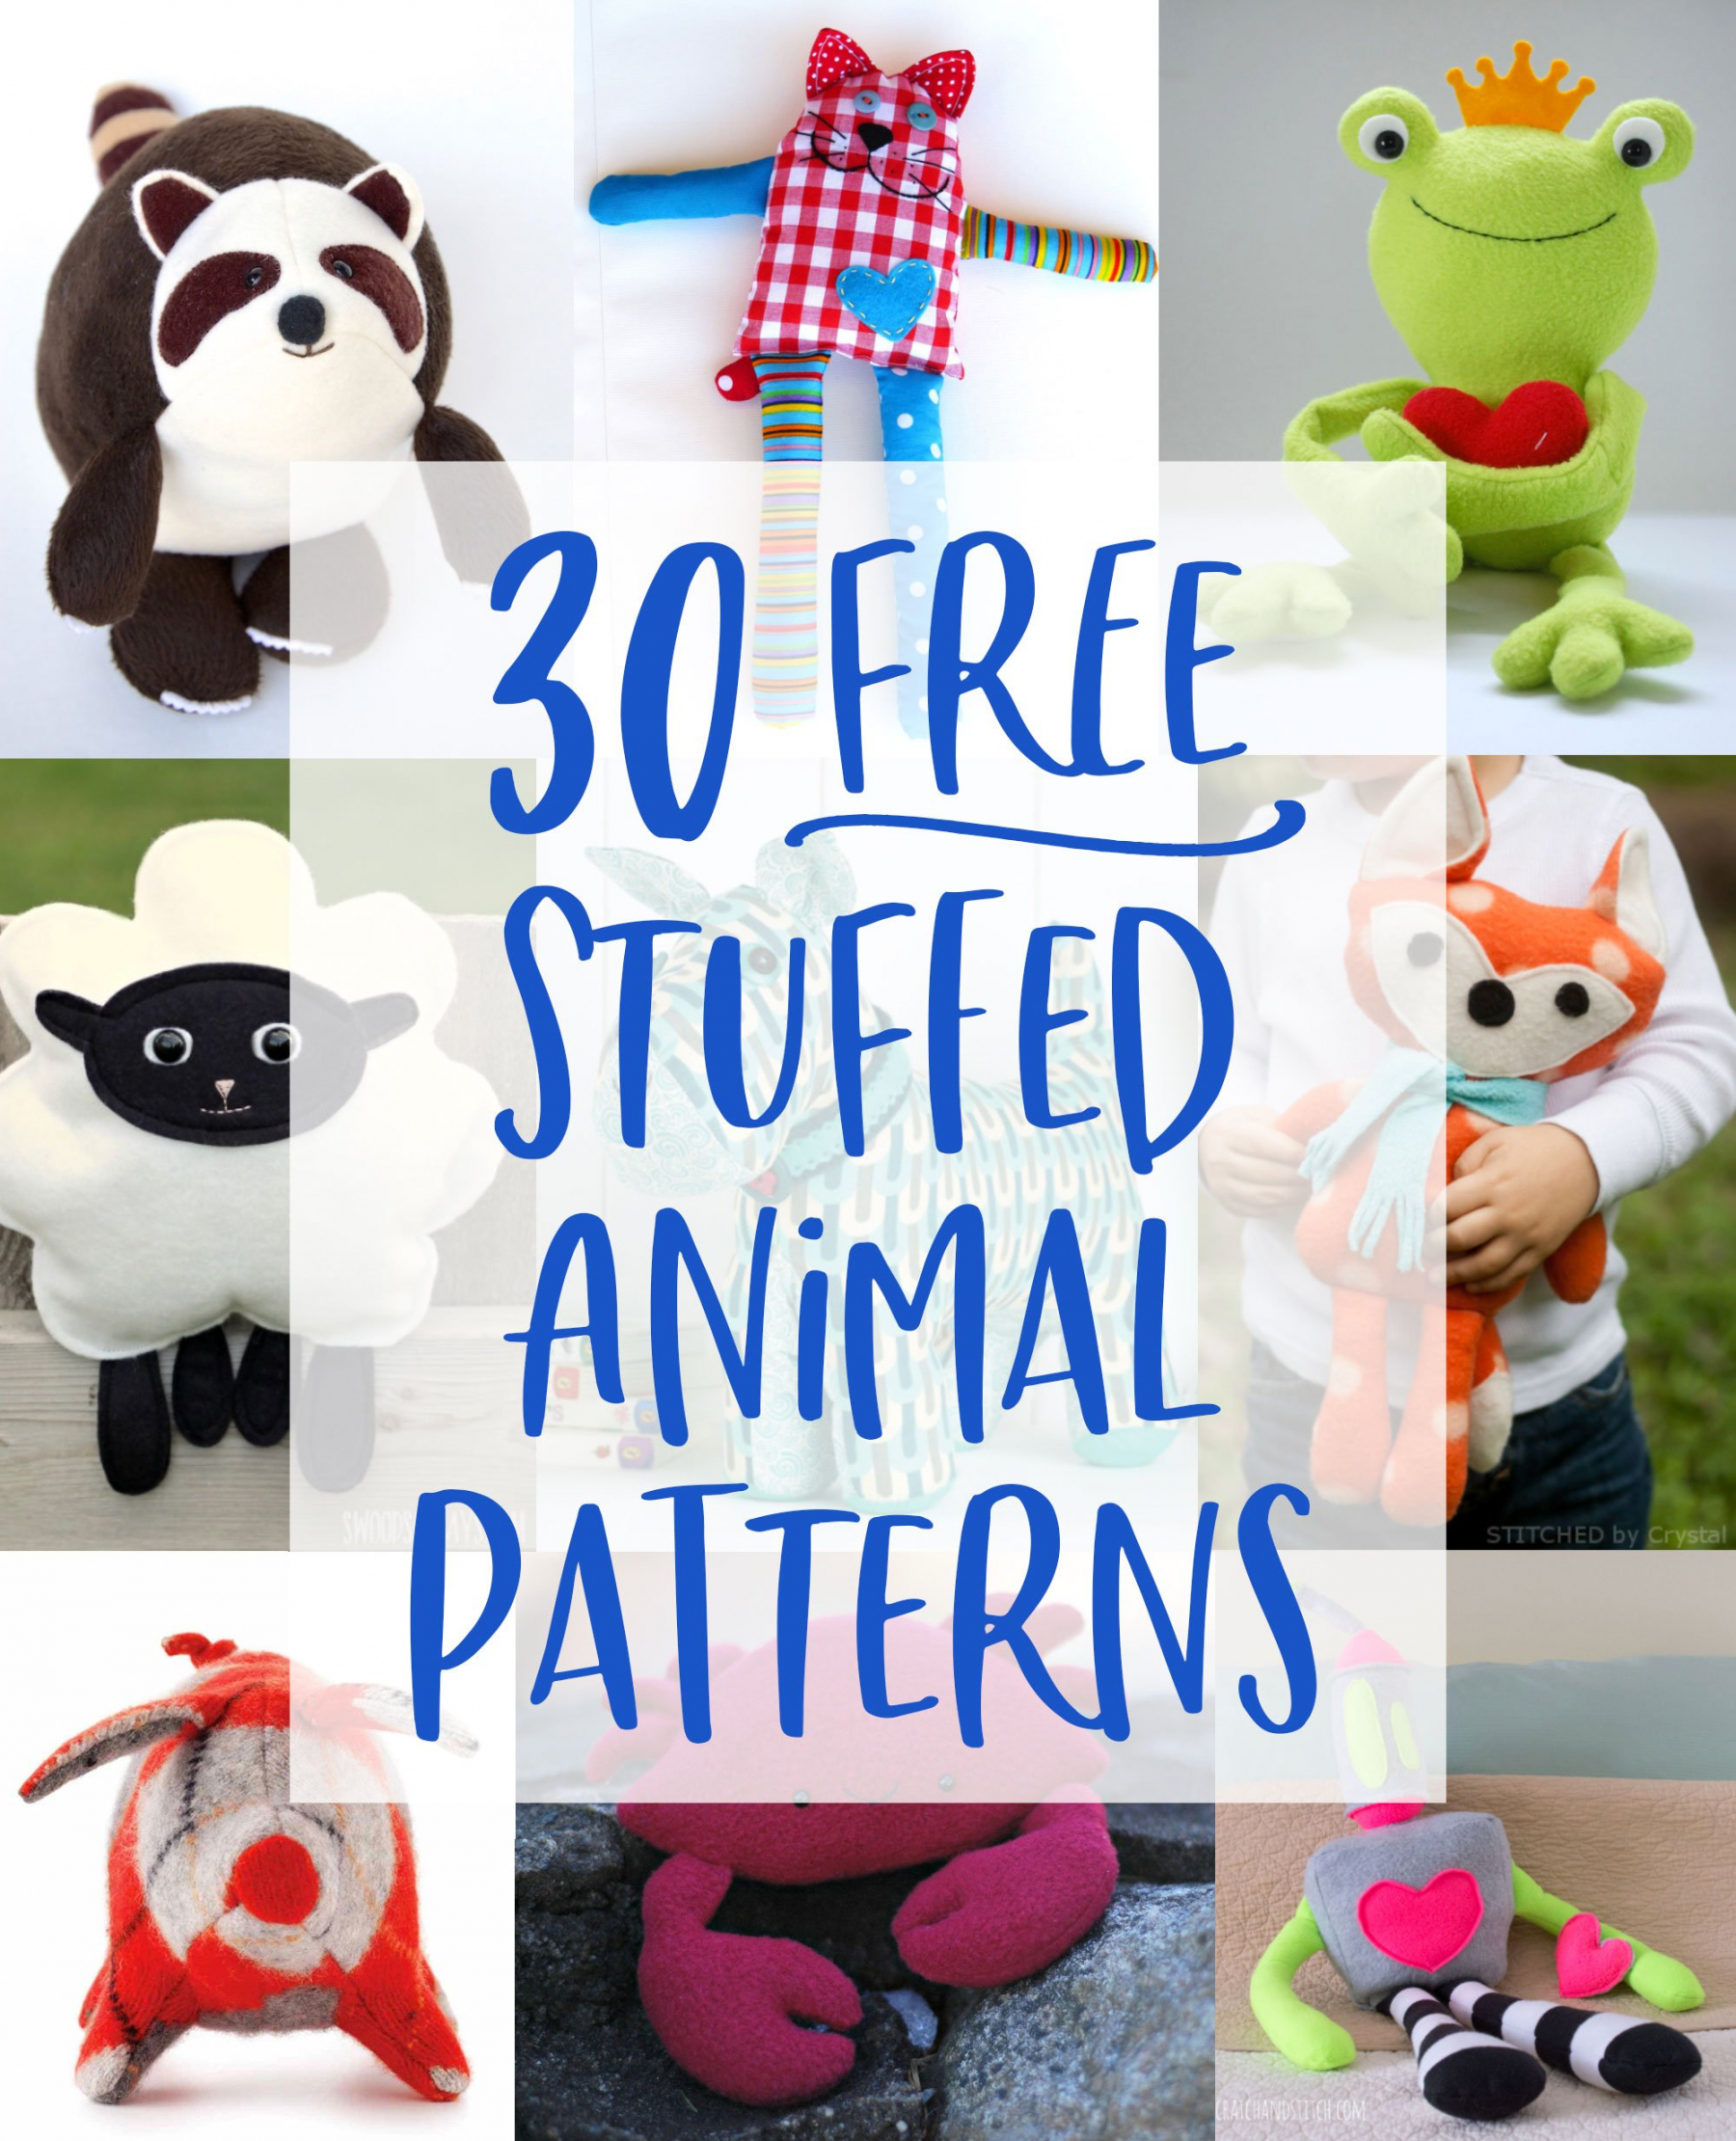 Cut Out Printable Free Easy Stuffed Animal Patterns - Printable -  FREE Stuffed Animal Patterns with Tutorials to Bring to Life